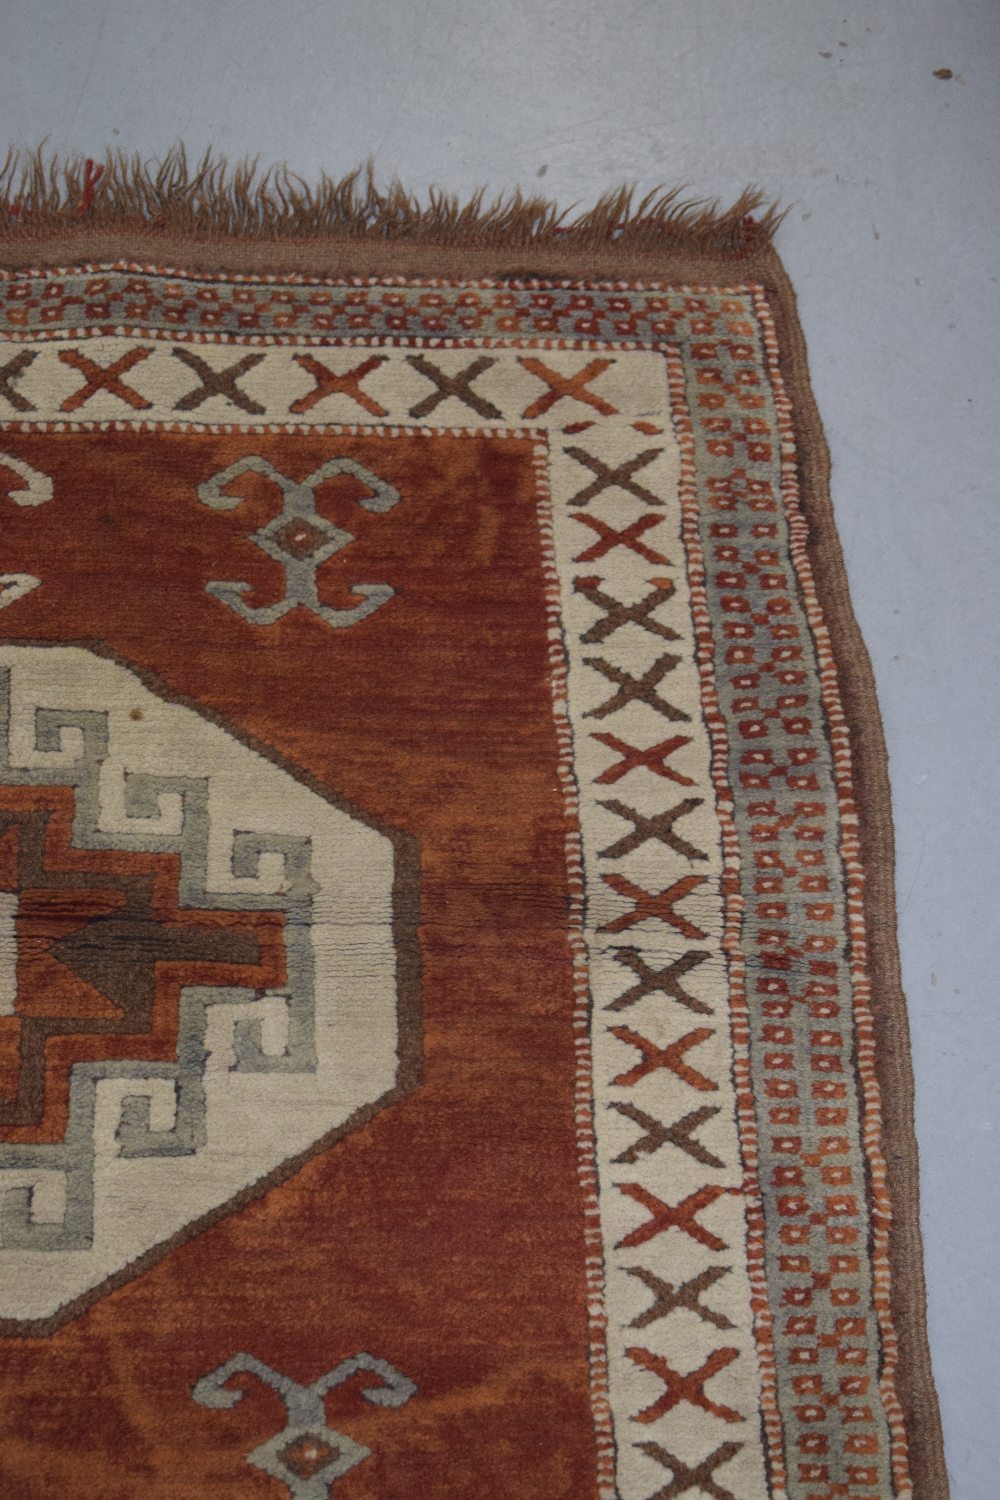 Two Anatolian rugs, the first: Konya kelim, central Anatolia, circa 1940s-50s, 4ft. 11in. X 3ft. - Image 12 of 17